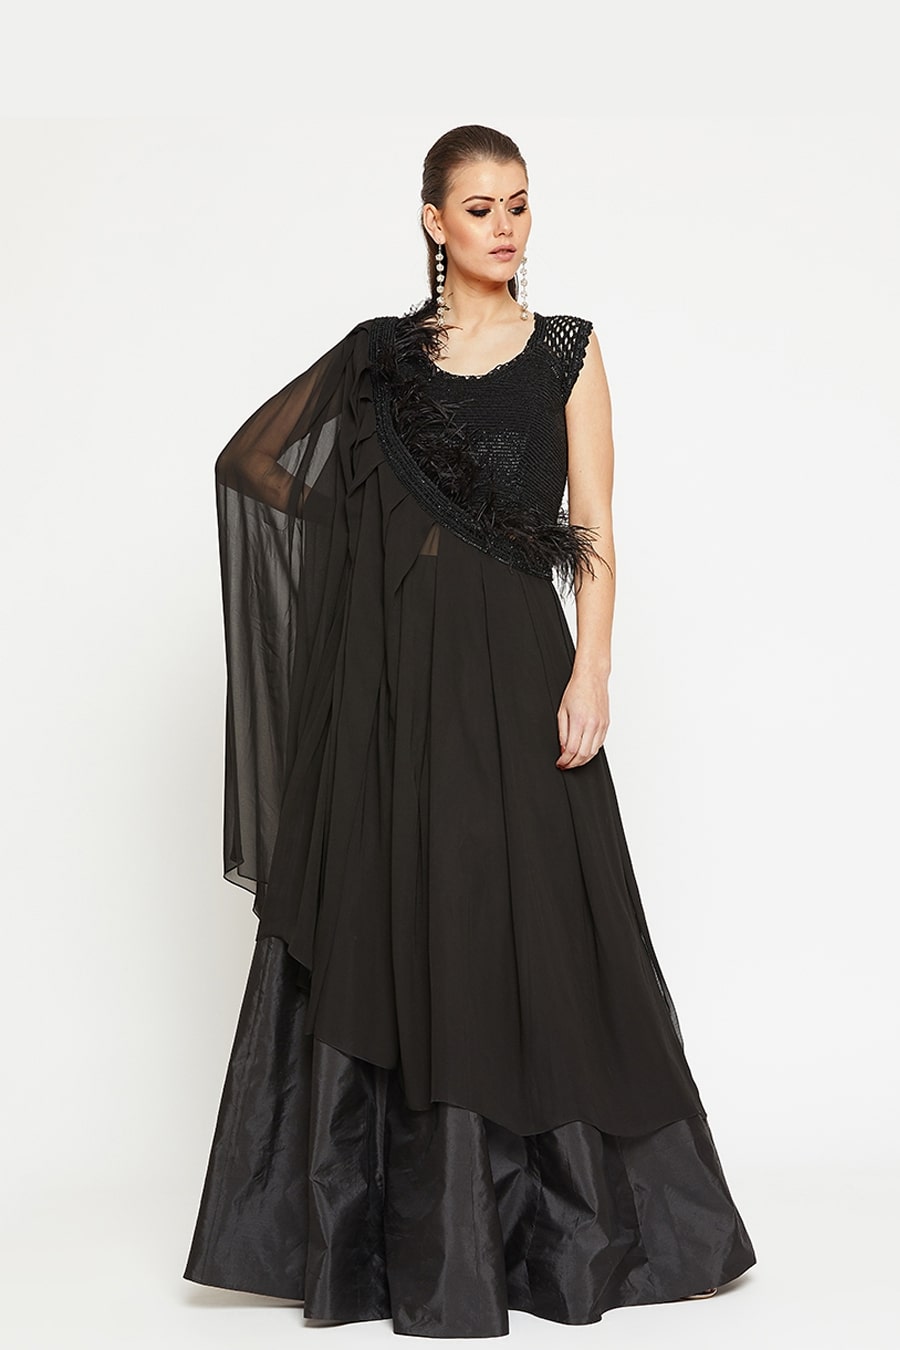 Black Cape with Skirt